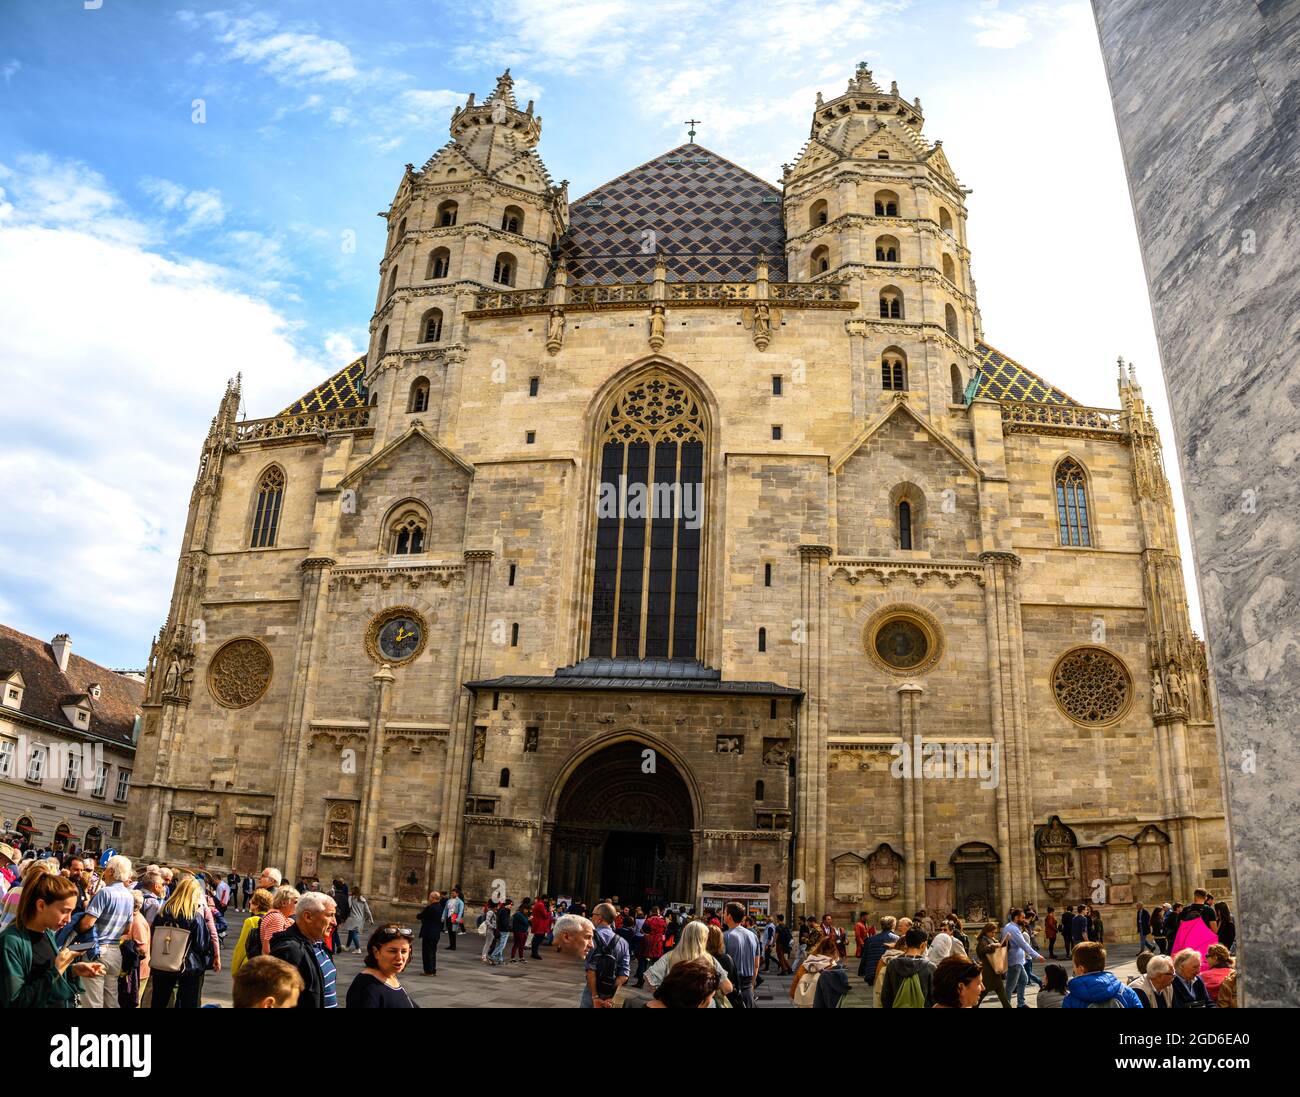 vienna Austria - September 27, 2019. St Stephens cathedral located in the famous Stephansplatz in Vienna city Center. Stock Photo